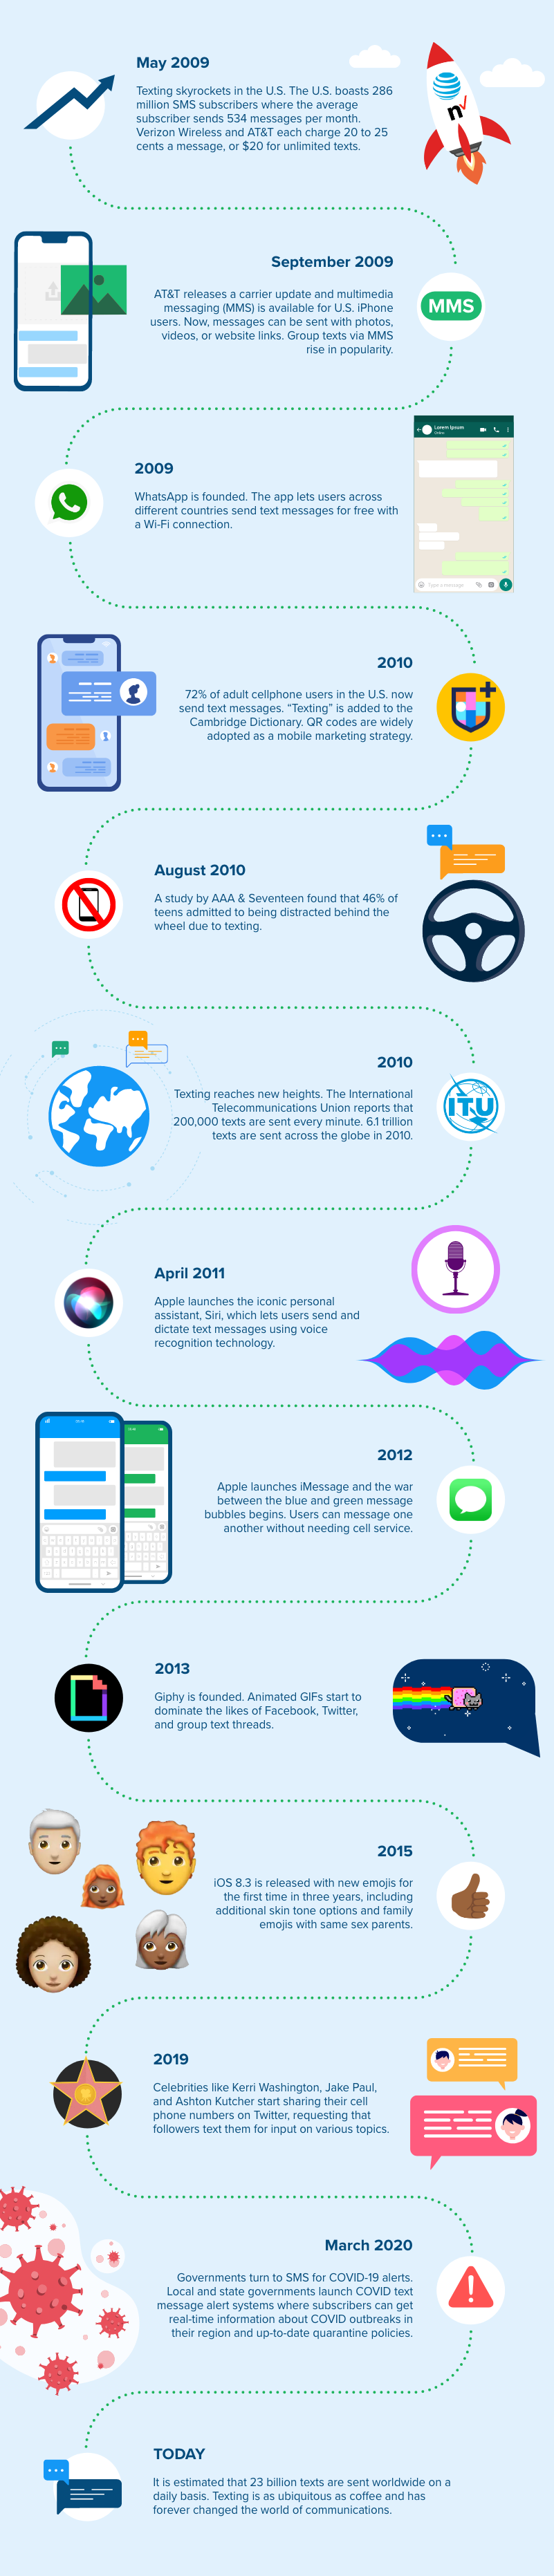 Alt: a timeline infographic showing the history of texting from 2009 to today